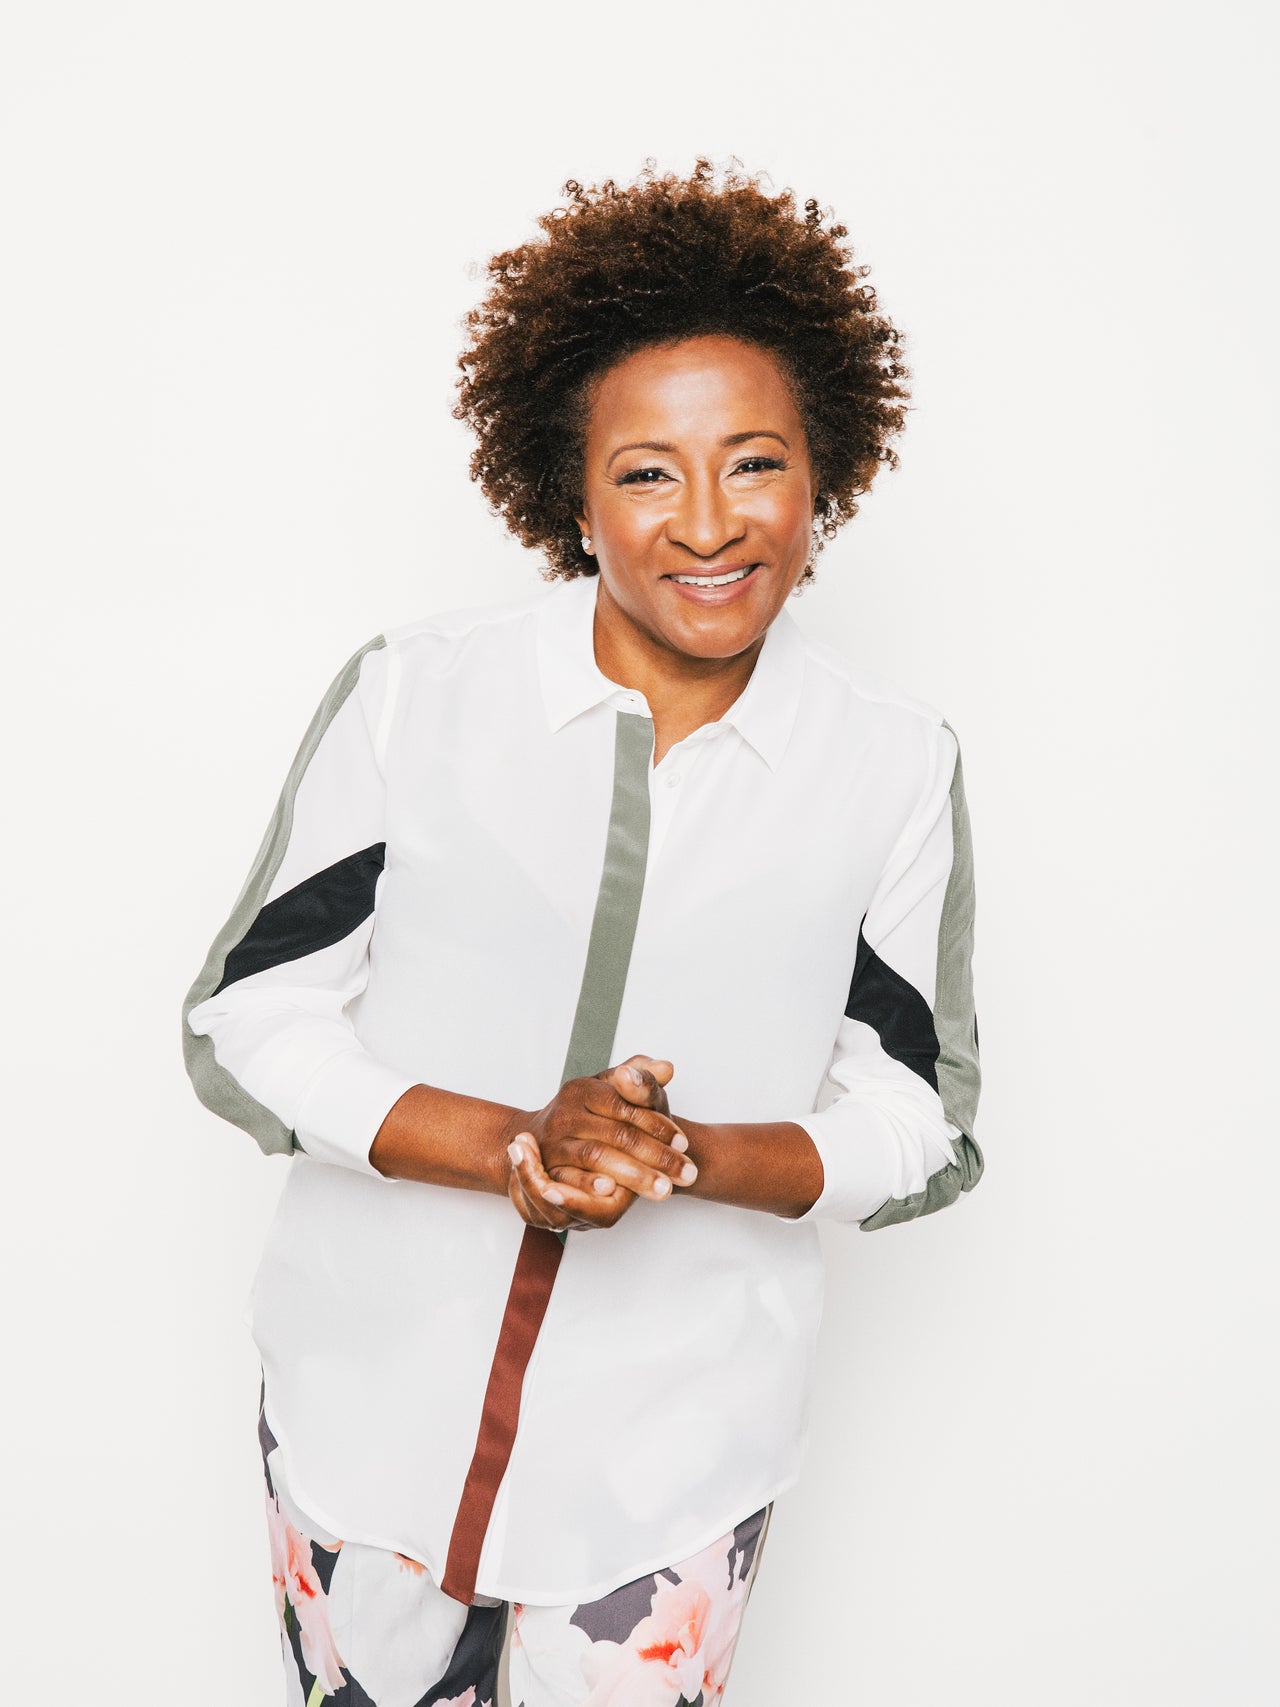 Wanda Sykes Is Releasing A New Comedy Special On Netflix And ...